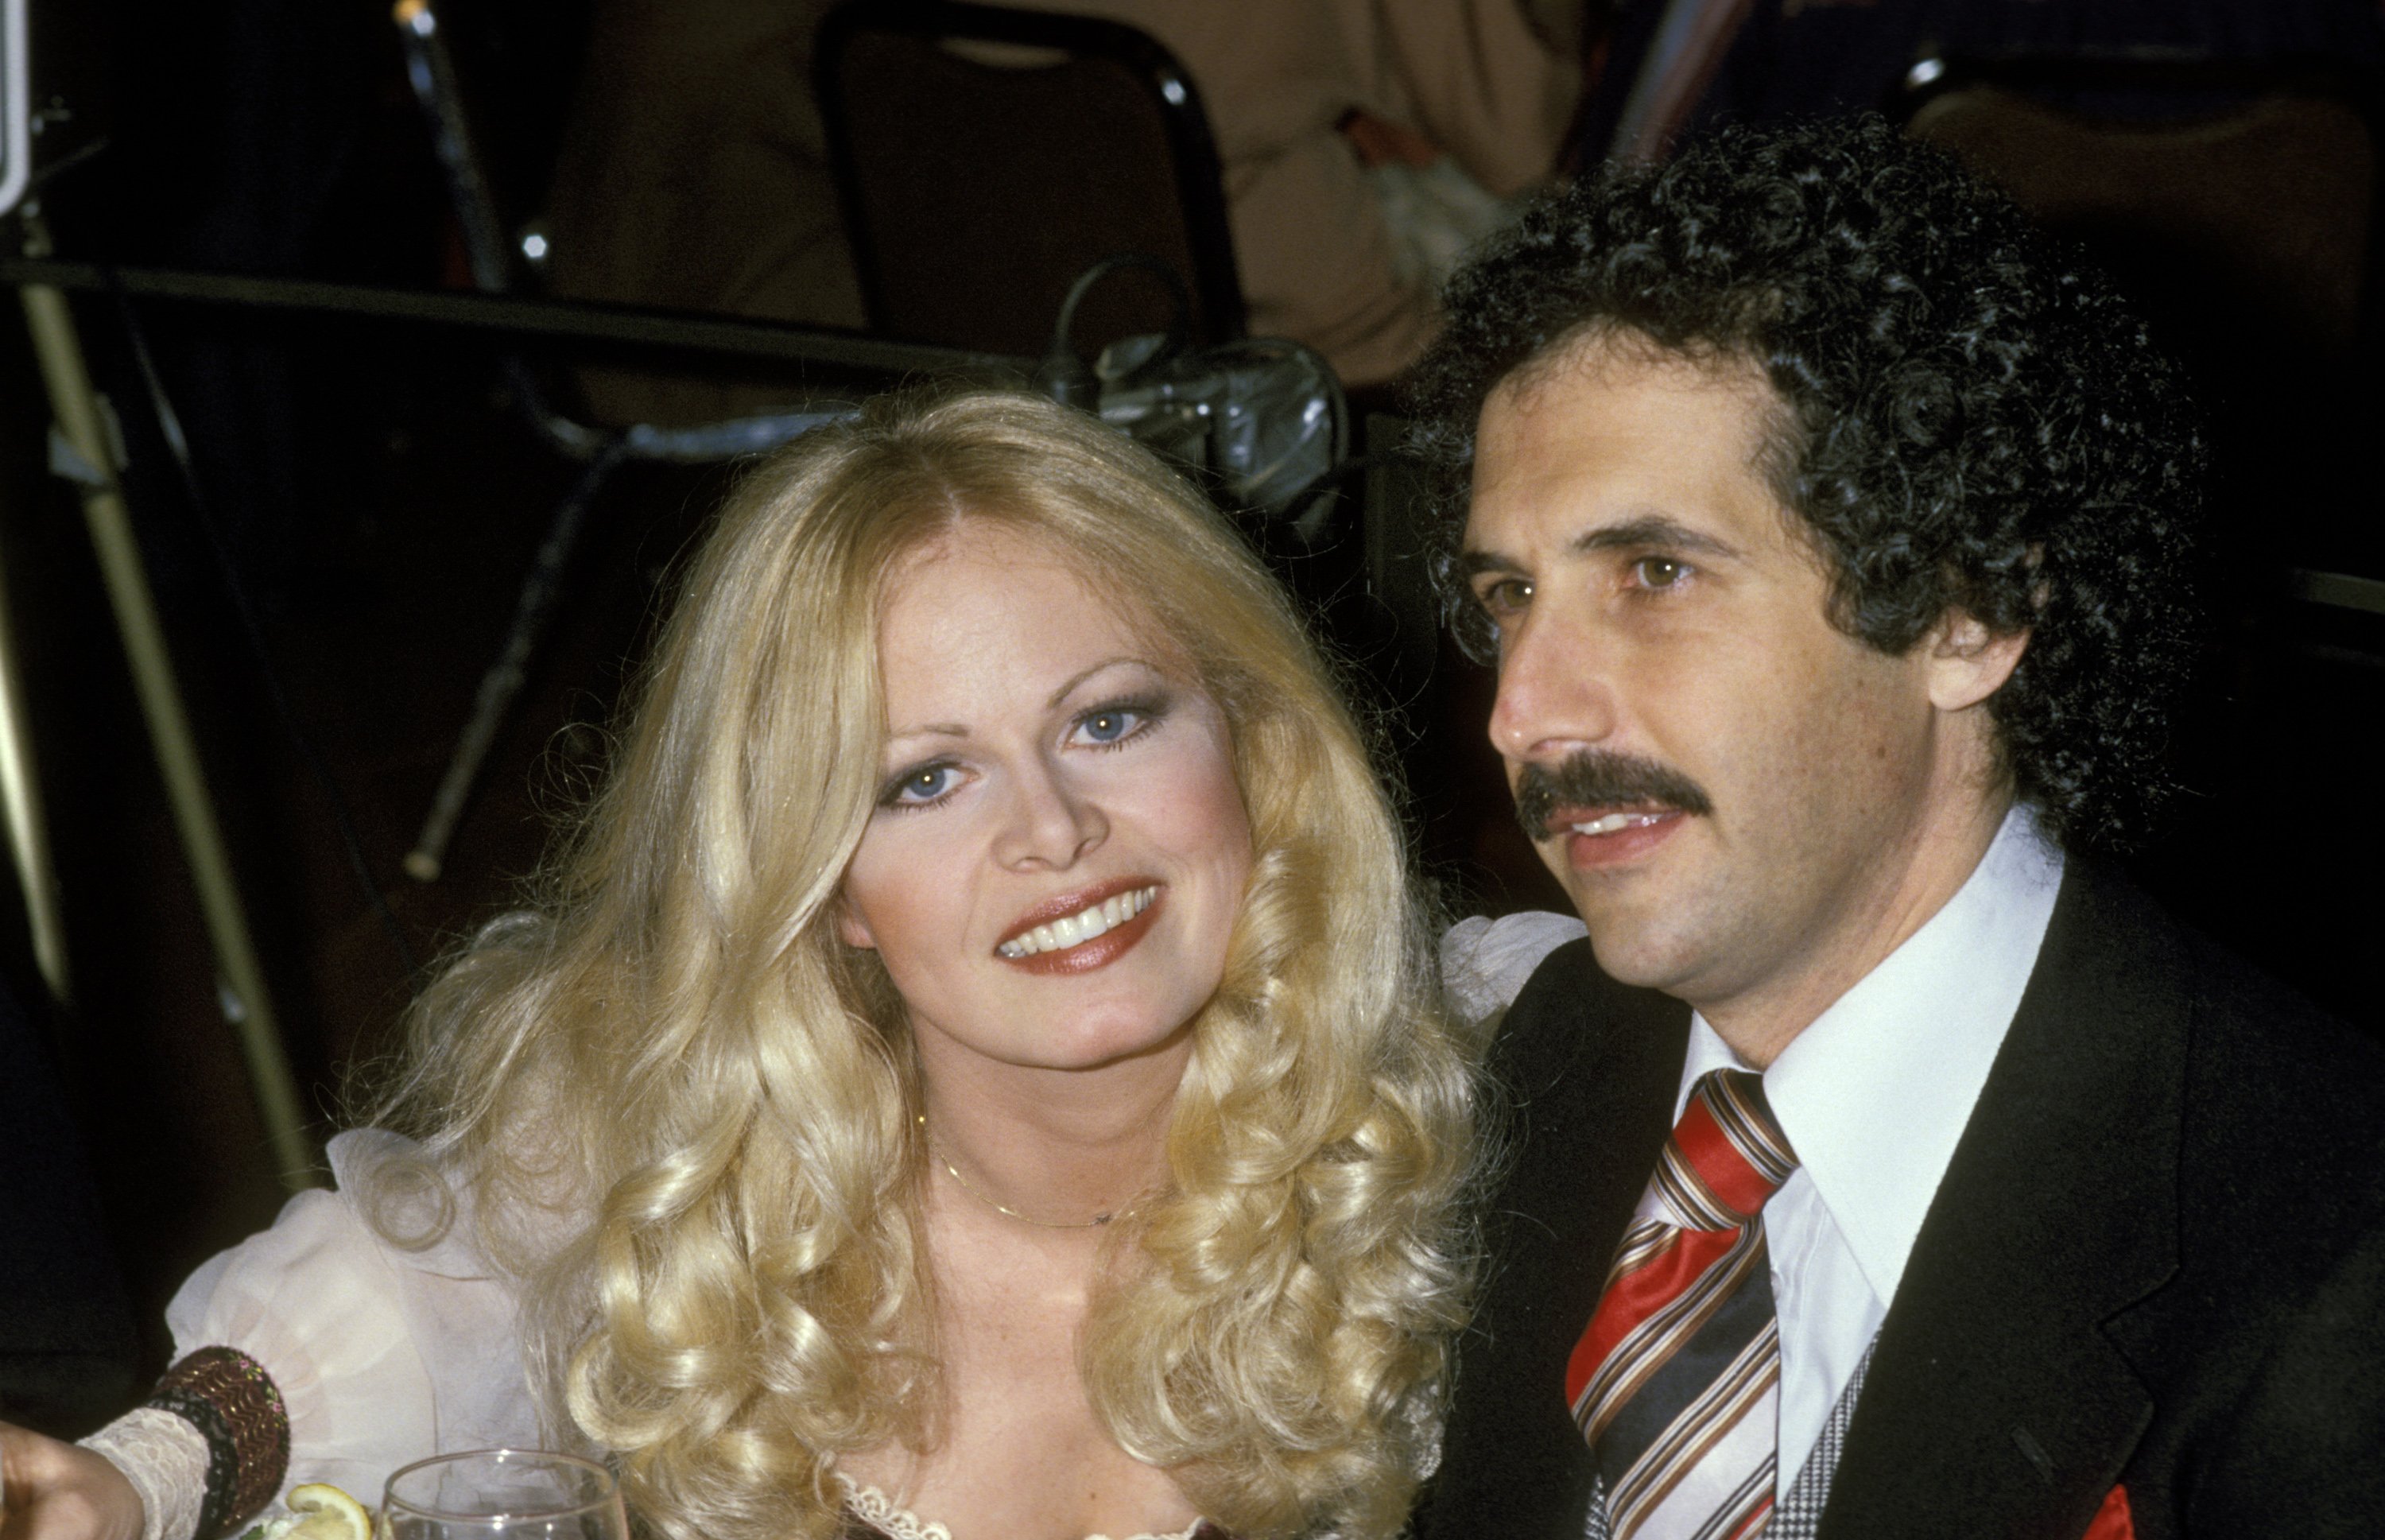 Sally Struthers and Husband William Rader during Iris Awards Banquet at Bonaventure Hotel in Los Angeles, California, United States. | Source: Getty Images